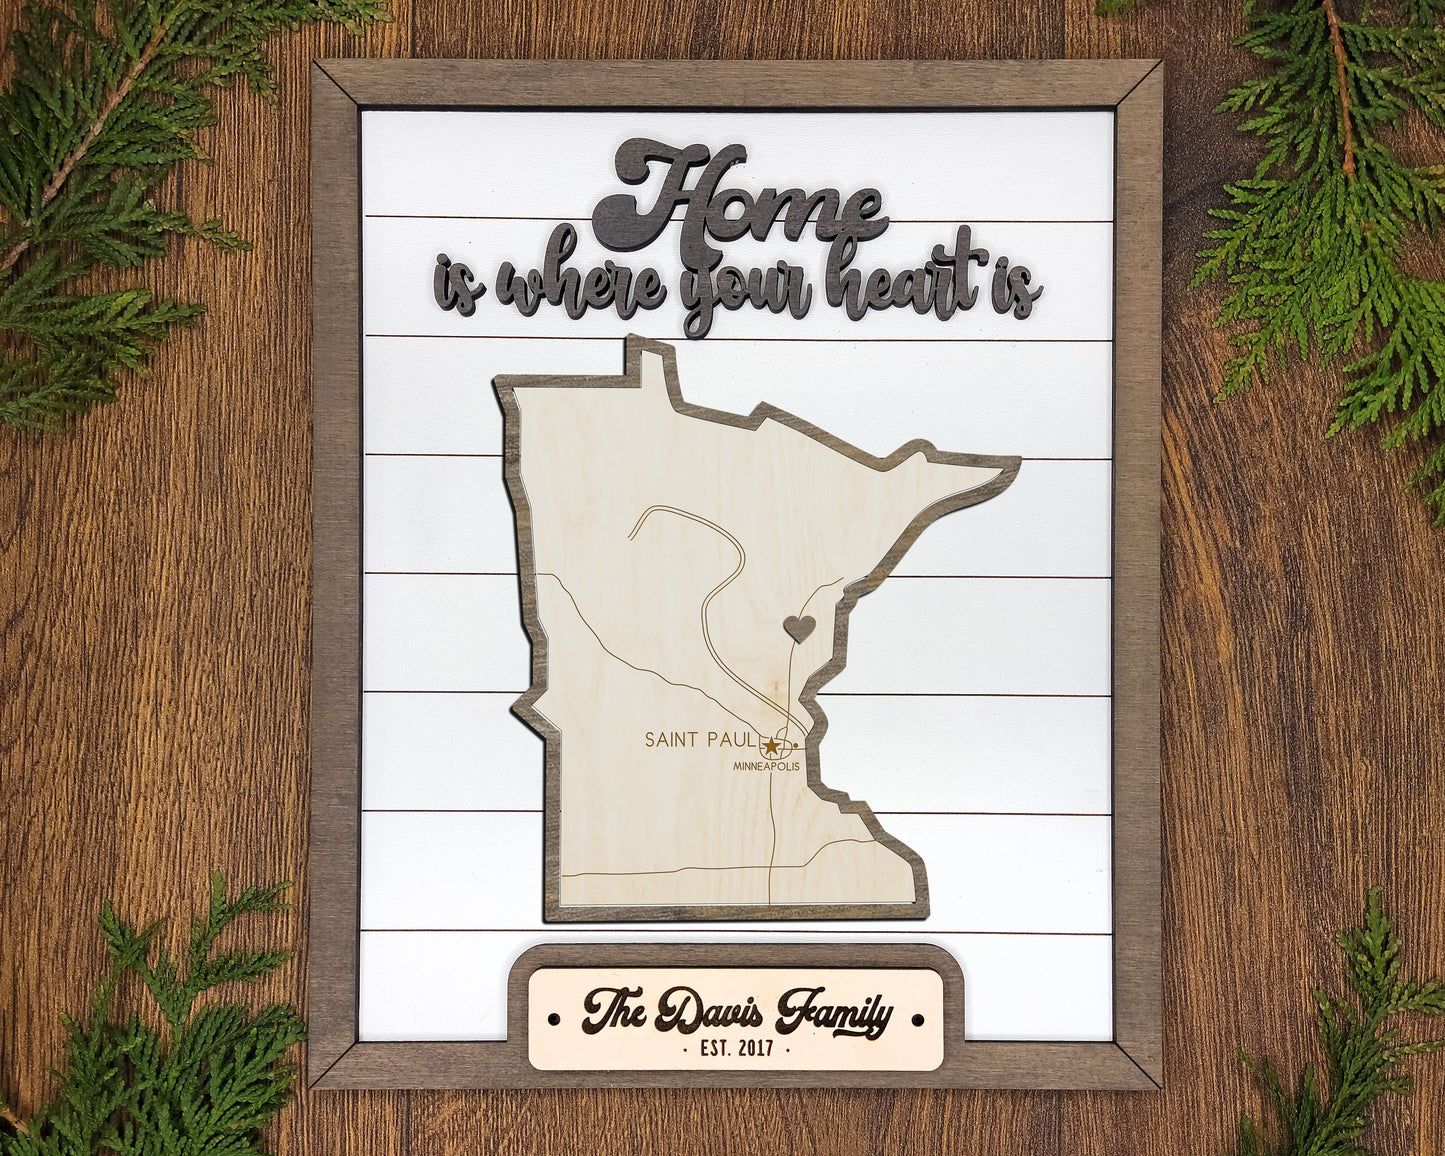 The Minnesota State Frame - 13 text options, 12 backgrounds, 25 icons Included - Make over 7,500 designs - Glowforge & Lightburn Tested